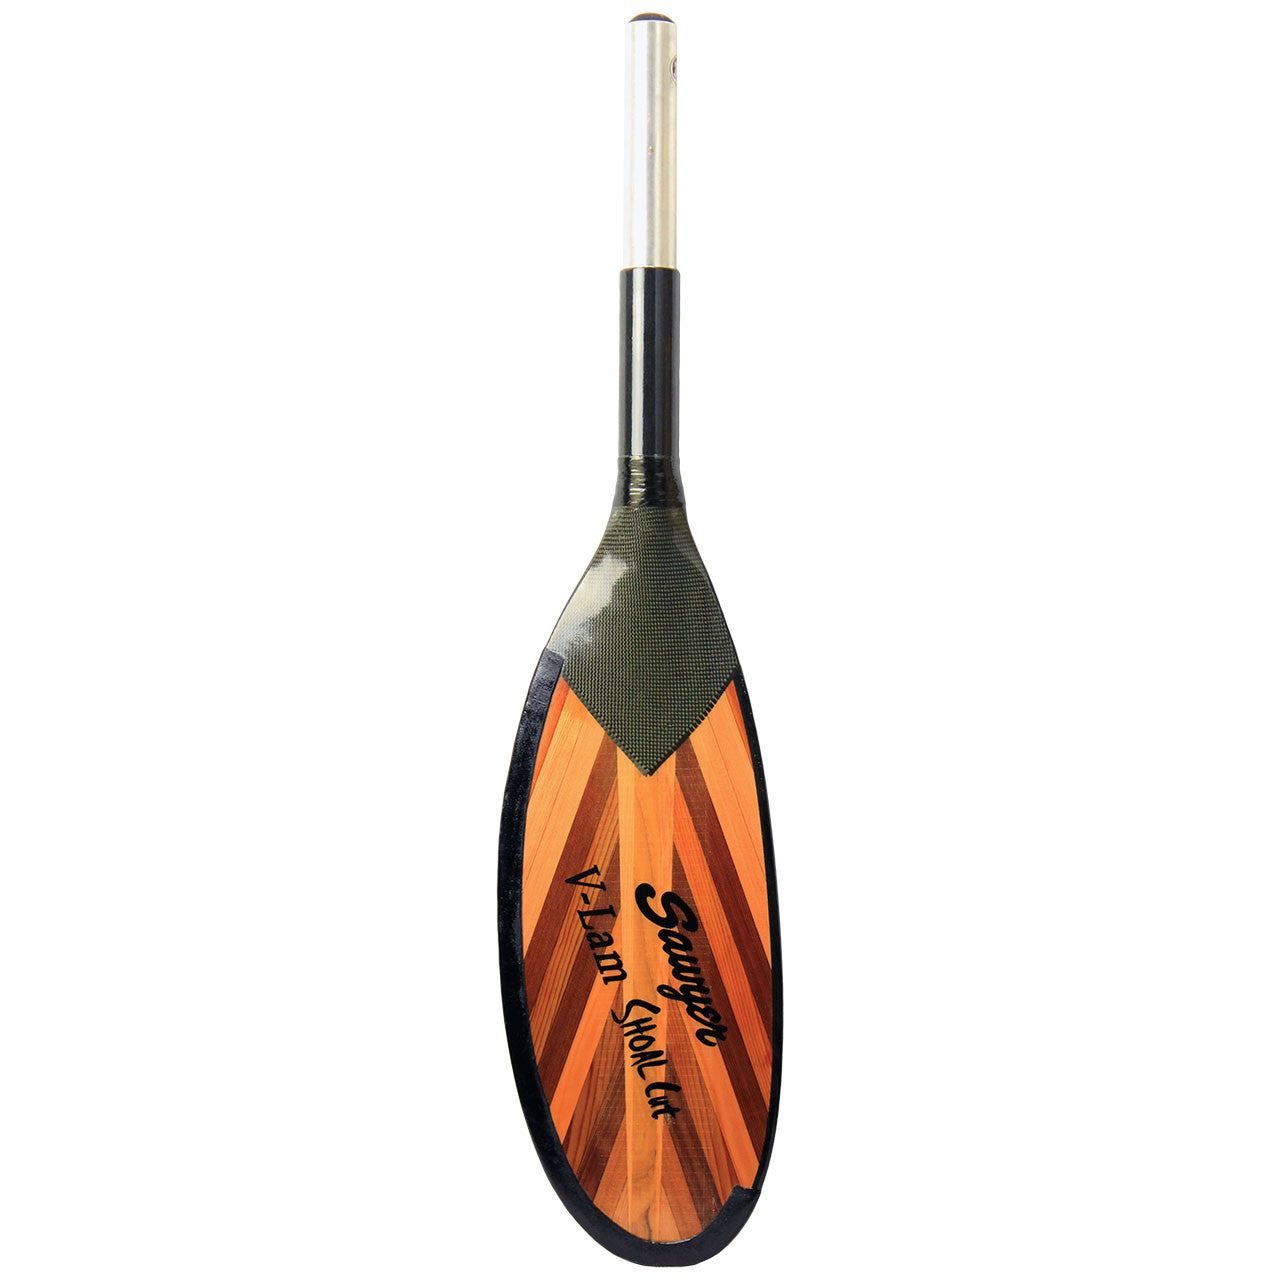 A paddle with an orange and black design on a fiberglass & laminated V-Lam Fir oar blade by Sawyer.